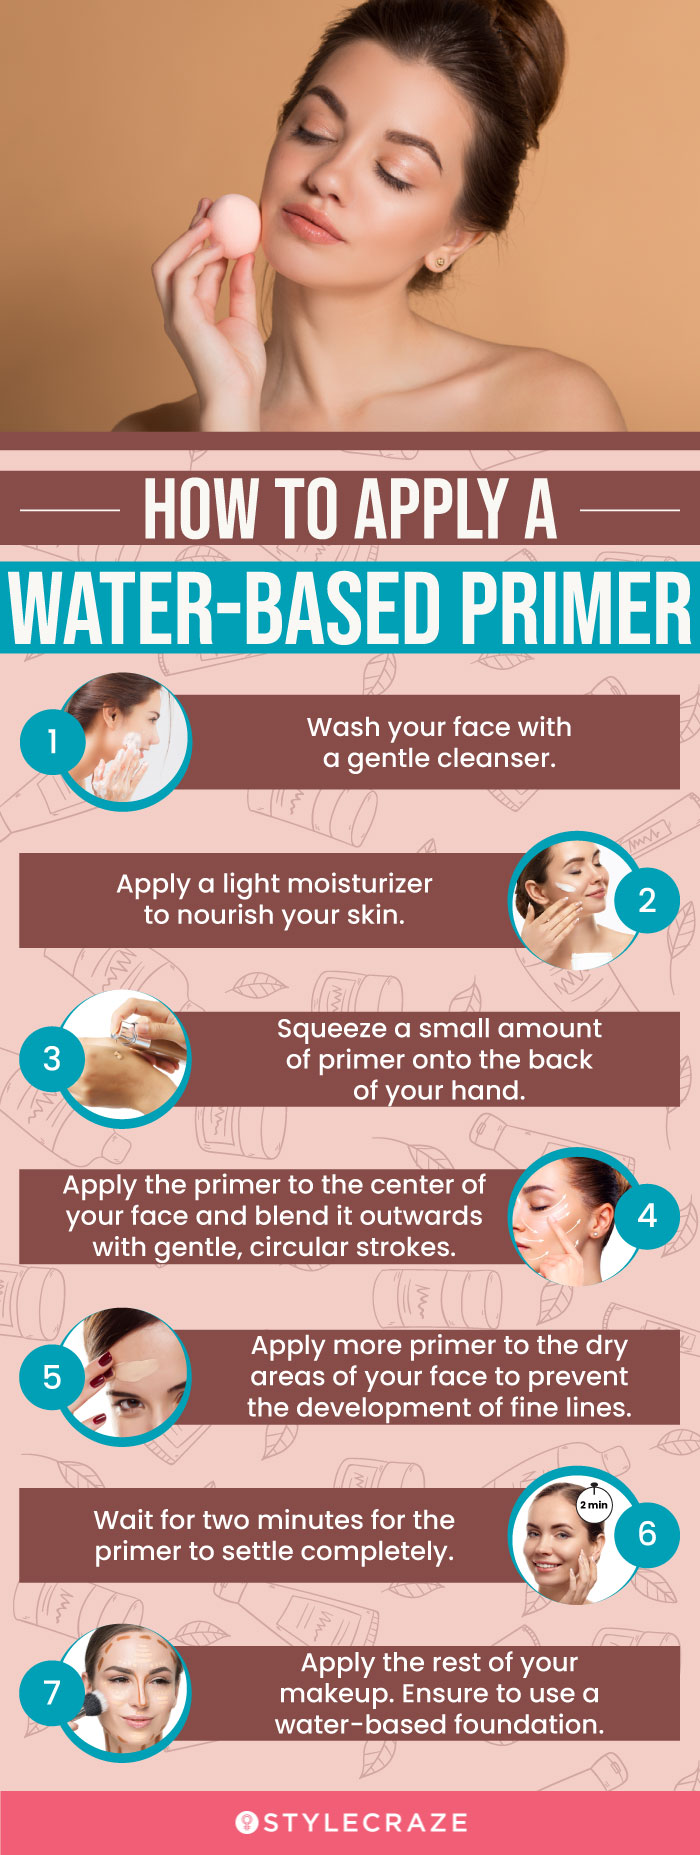 How To Apply A Water-Based Primer